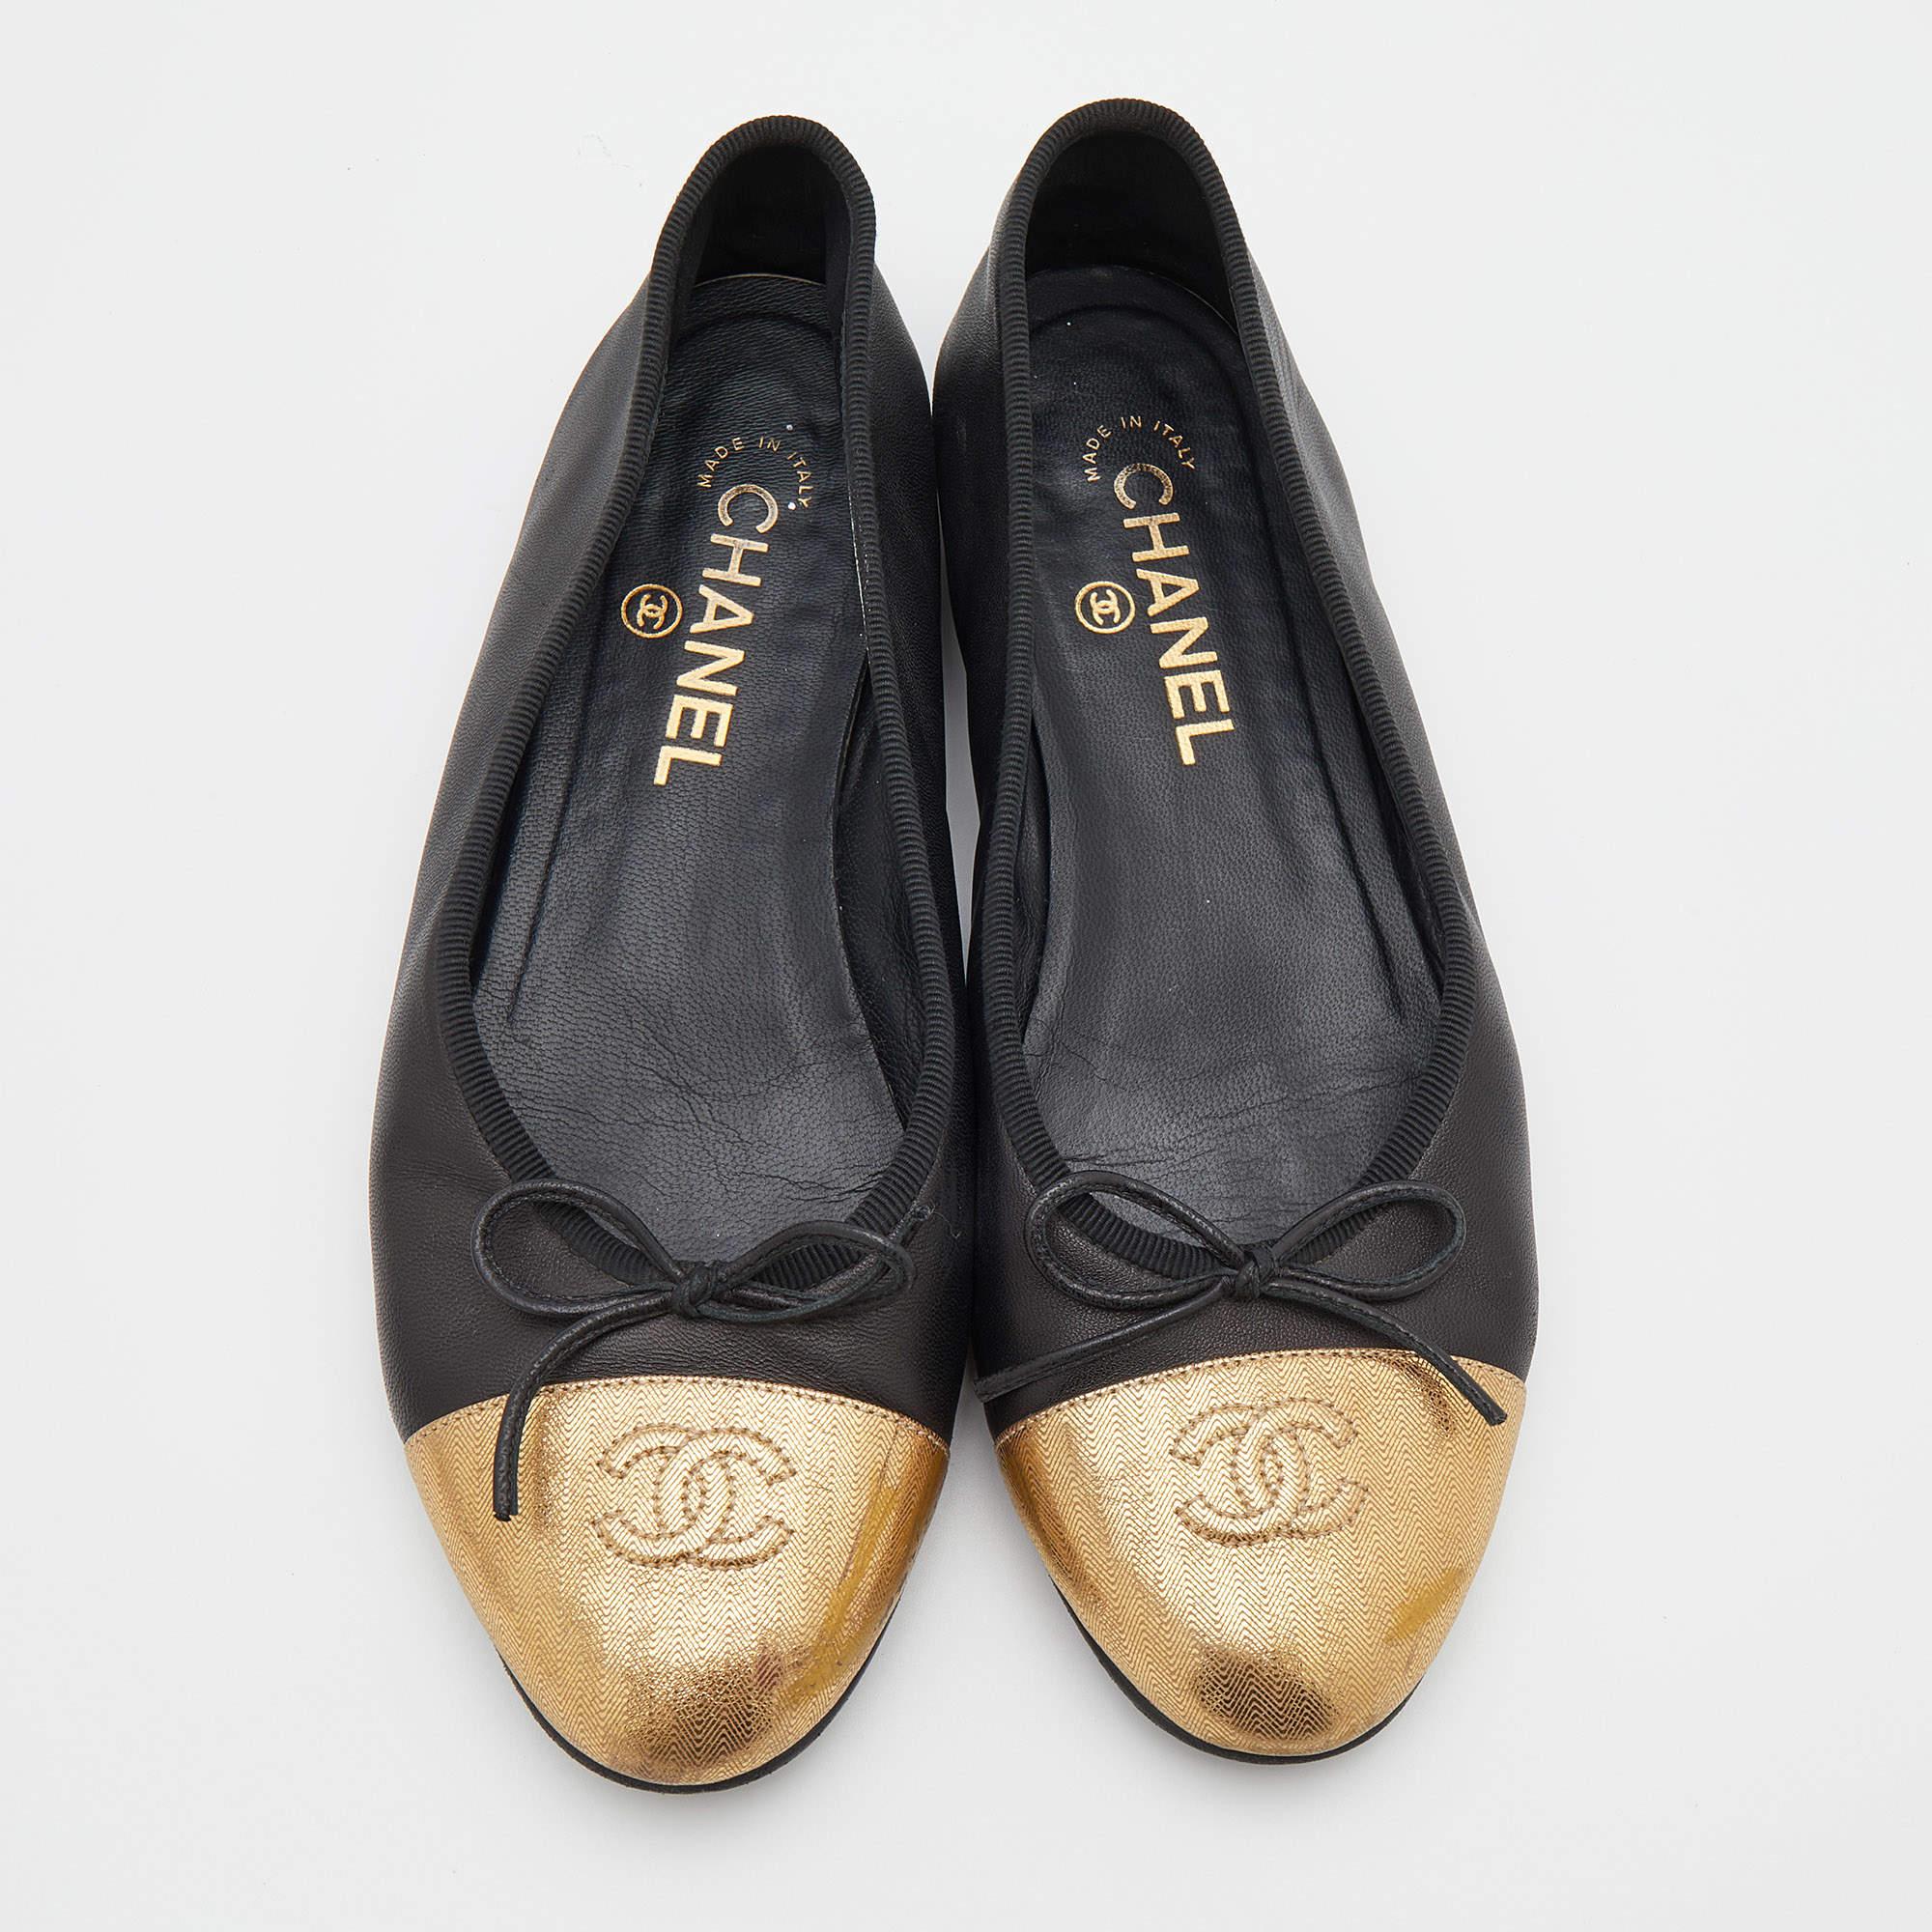 These classy Chanel ballet flats reflect the brand's dedication to flawless craftsmanship. They are made to fit snugly and be durable. Get the best of comfortable style with this pair.

Includes
Original Dustbag